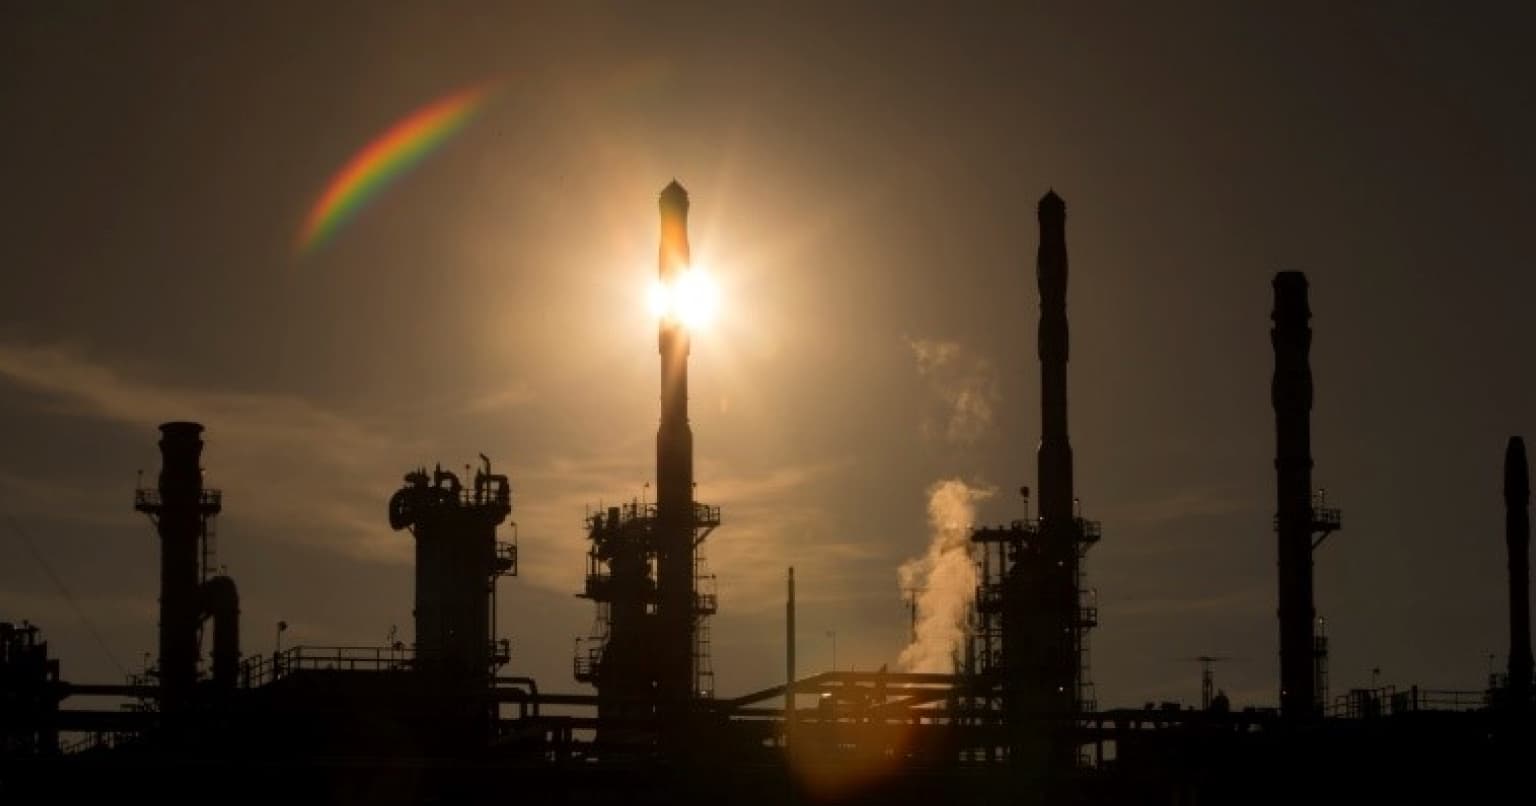 Sunset image of a refinery.